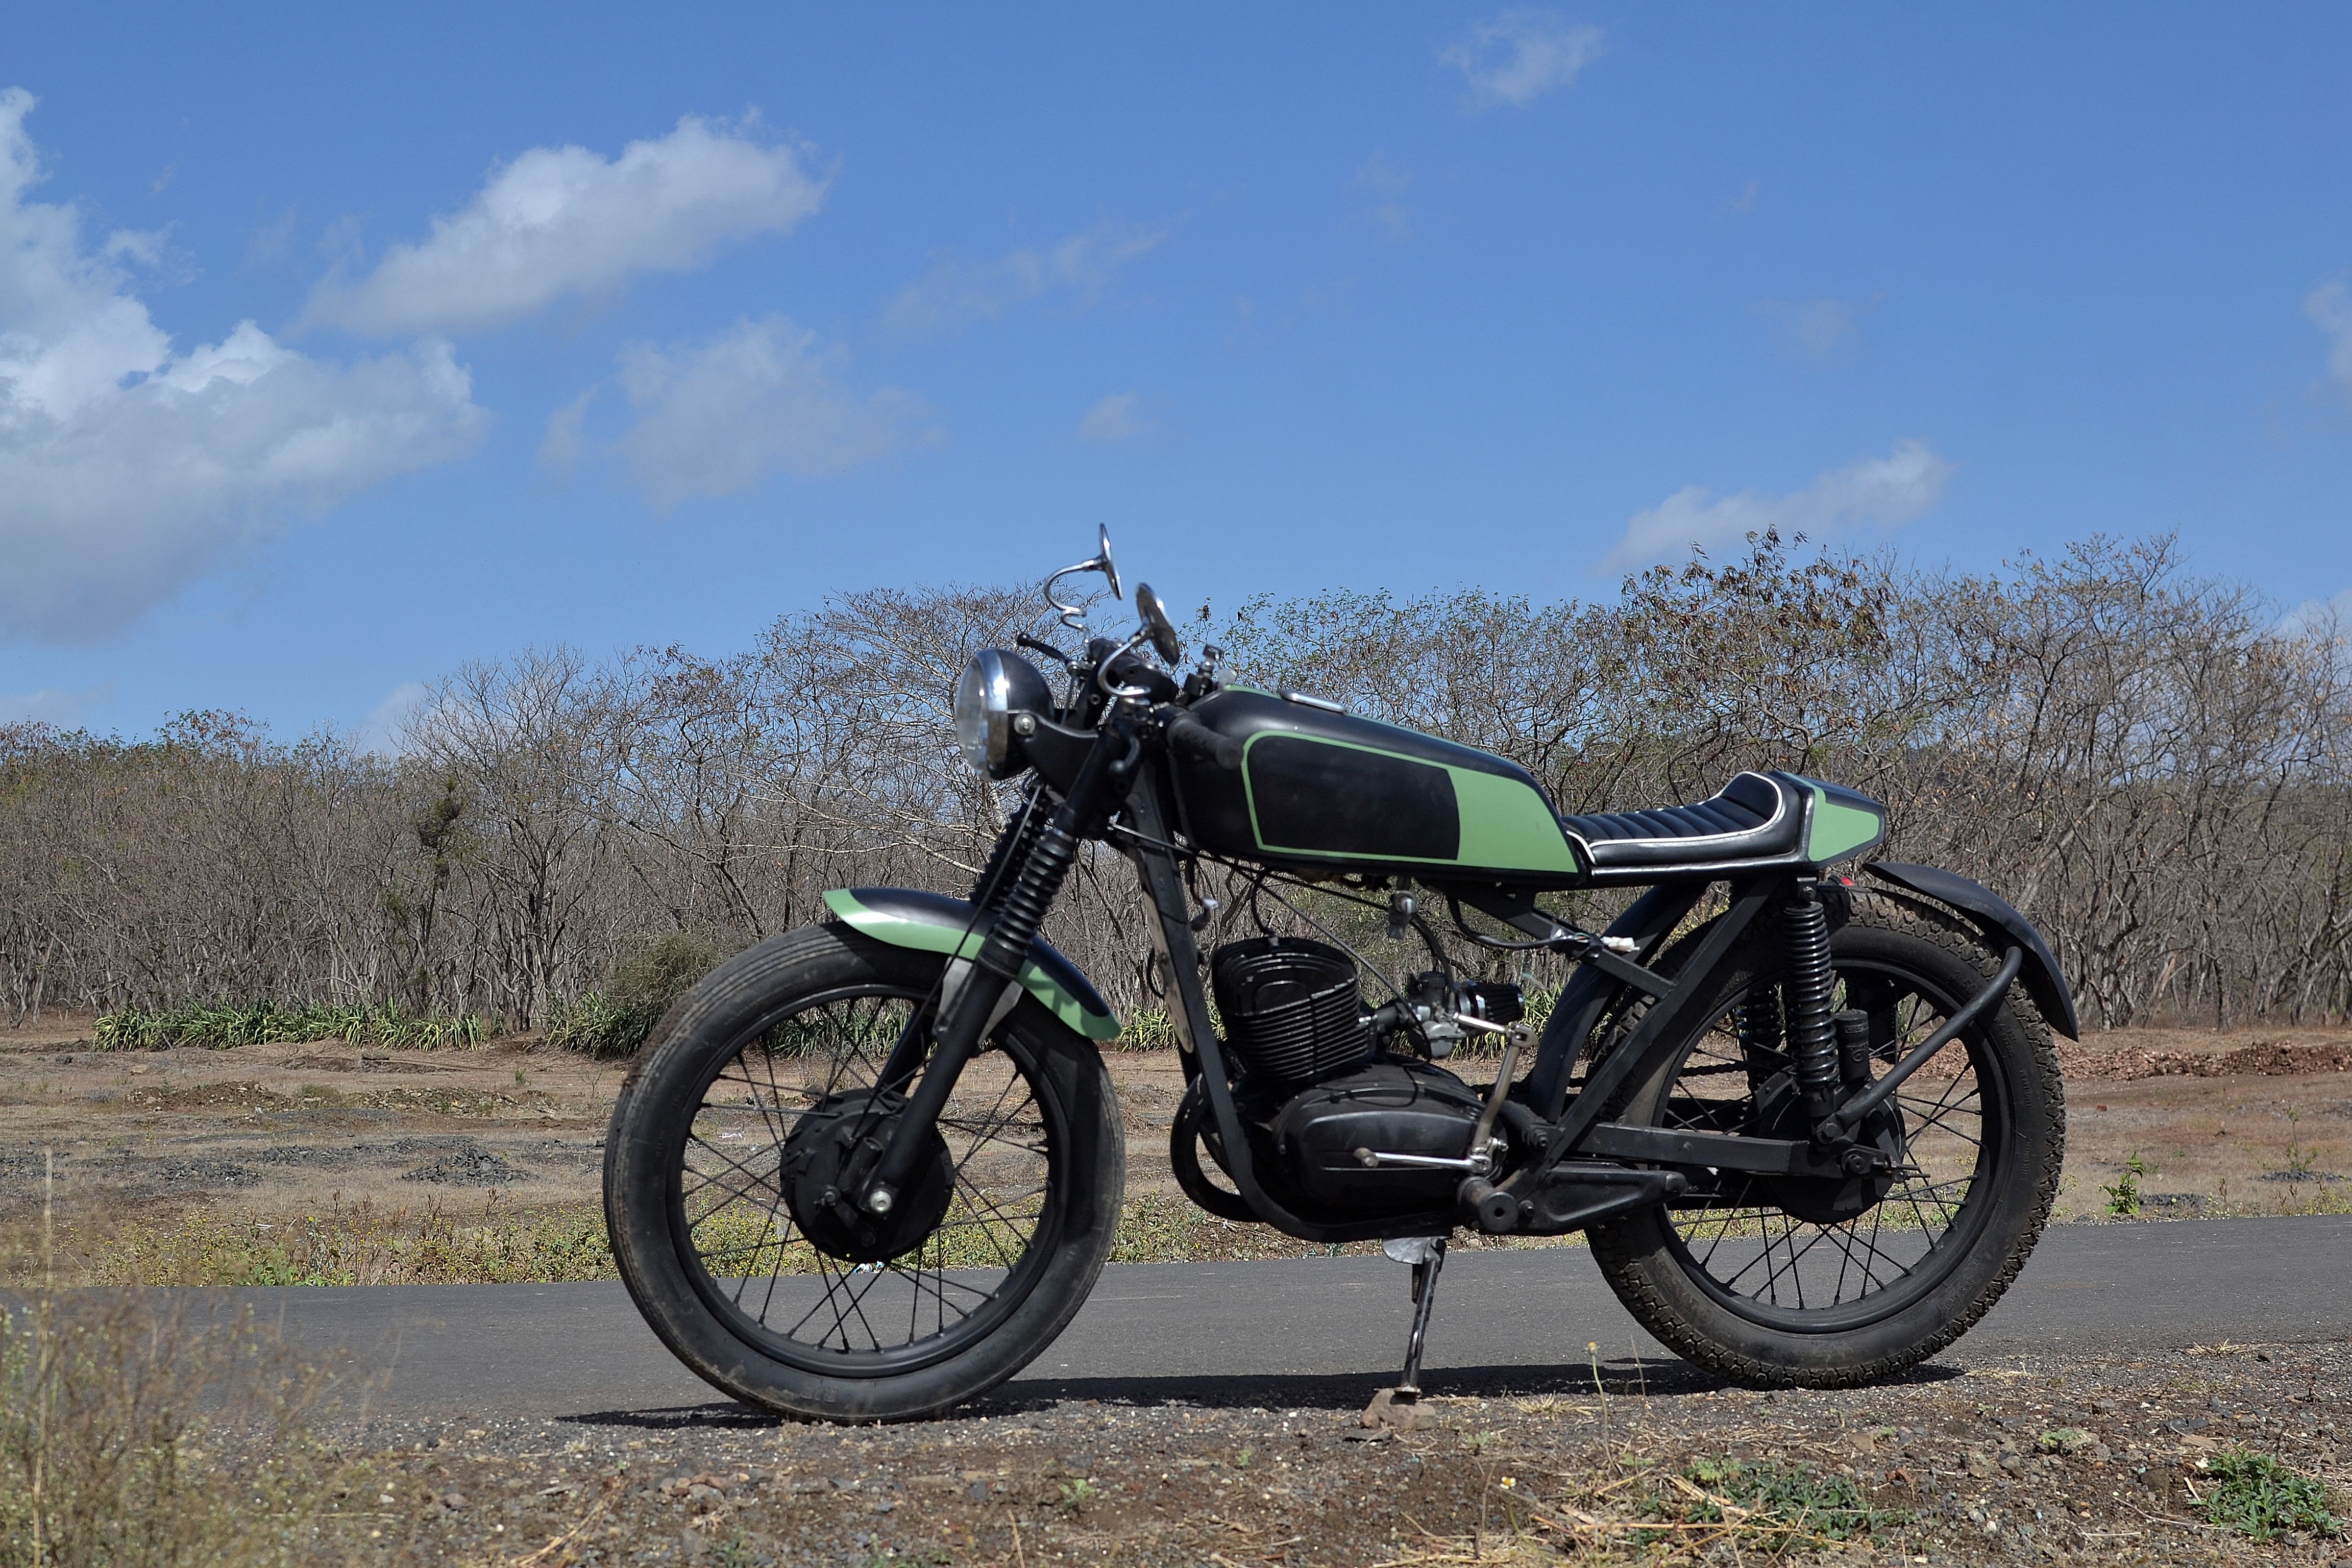 Rajdoot 175 From Olx To Cafe Racer Art On Vehicles Customs